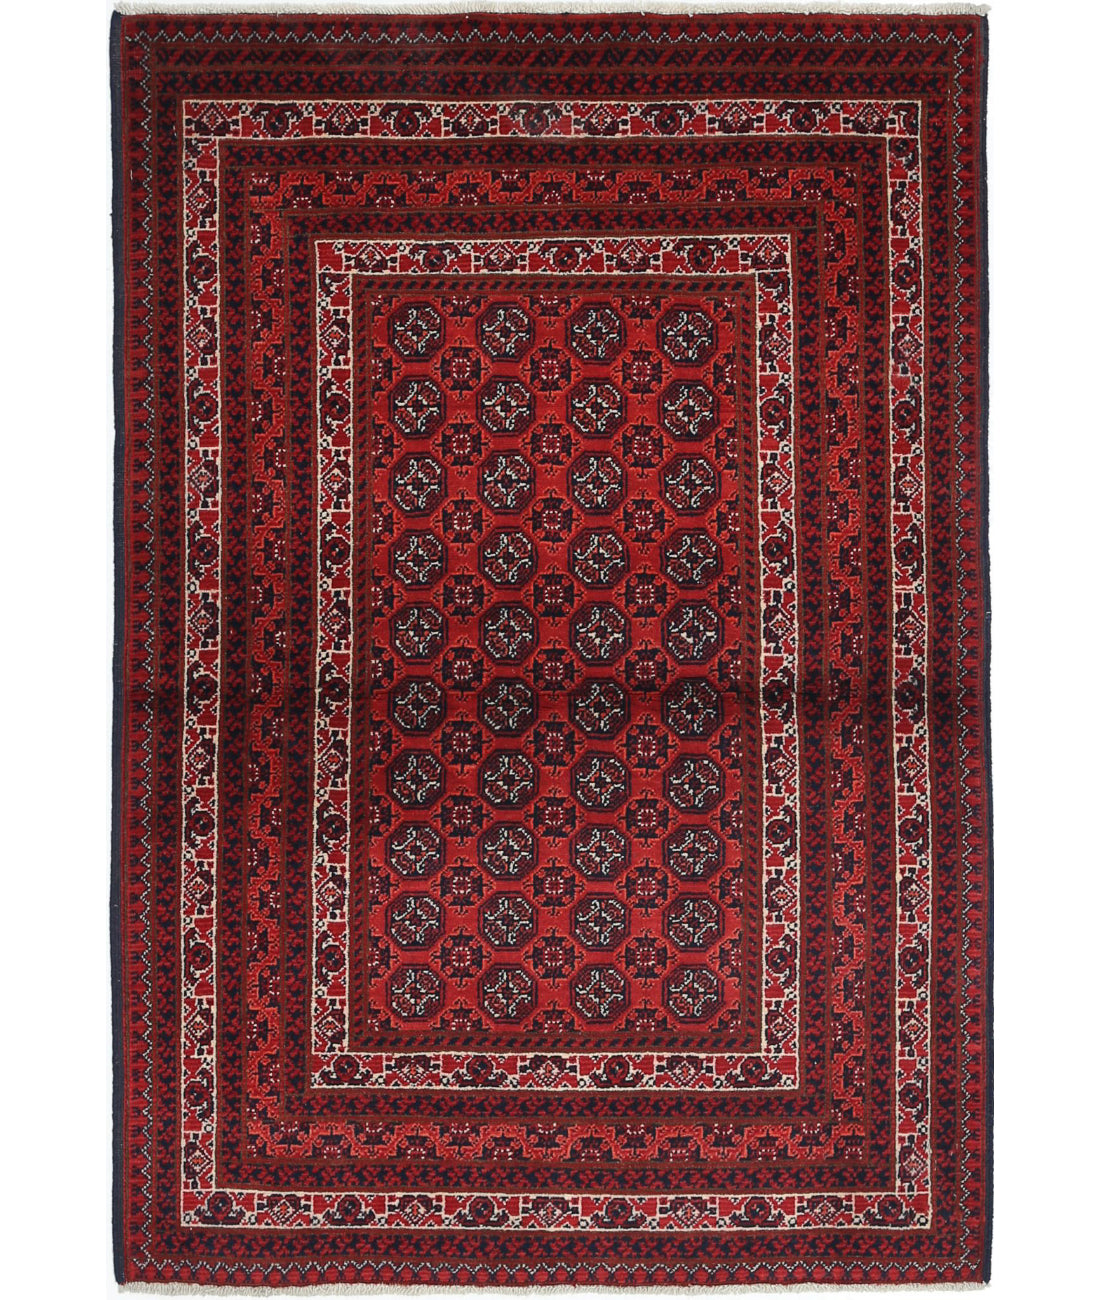 Afghan 2'8'' X 3'10'' Hand-Knotted Wool Rug 2'8'' x 3'10'' (80 X 115) / Red / N/A